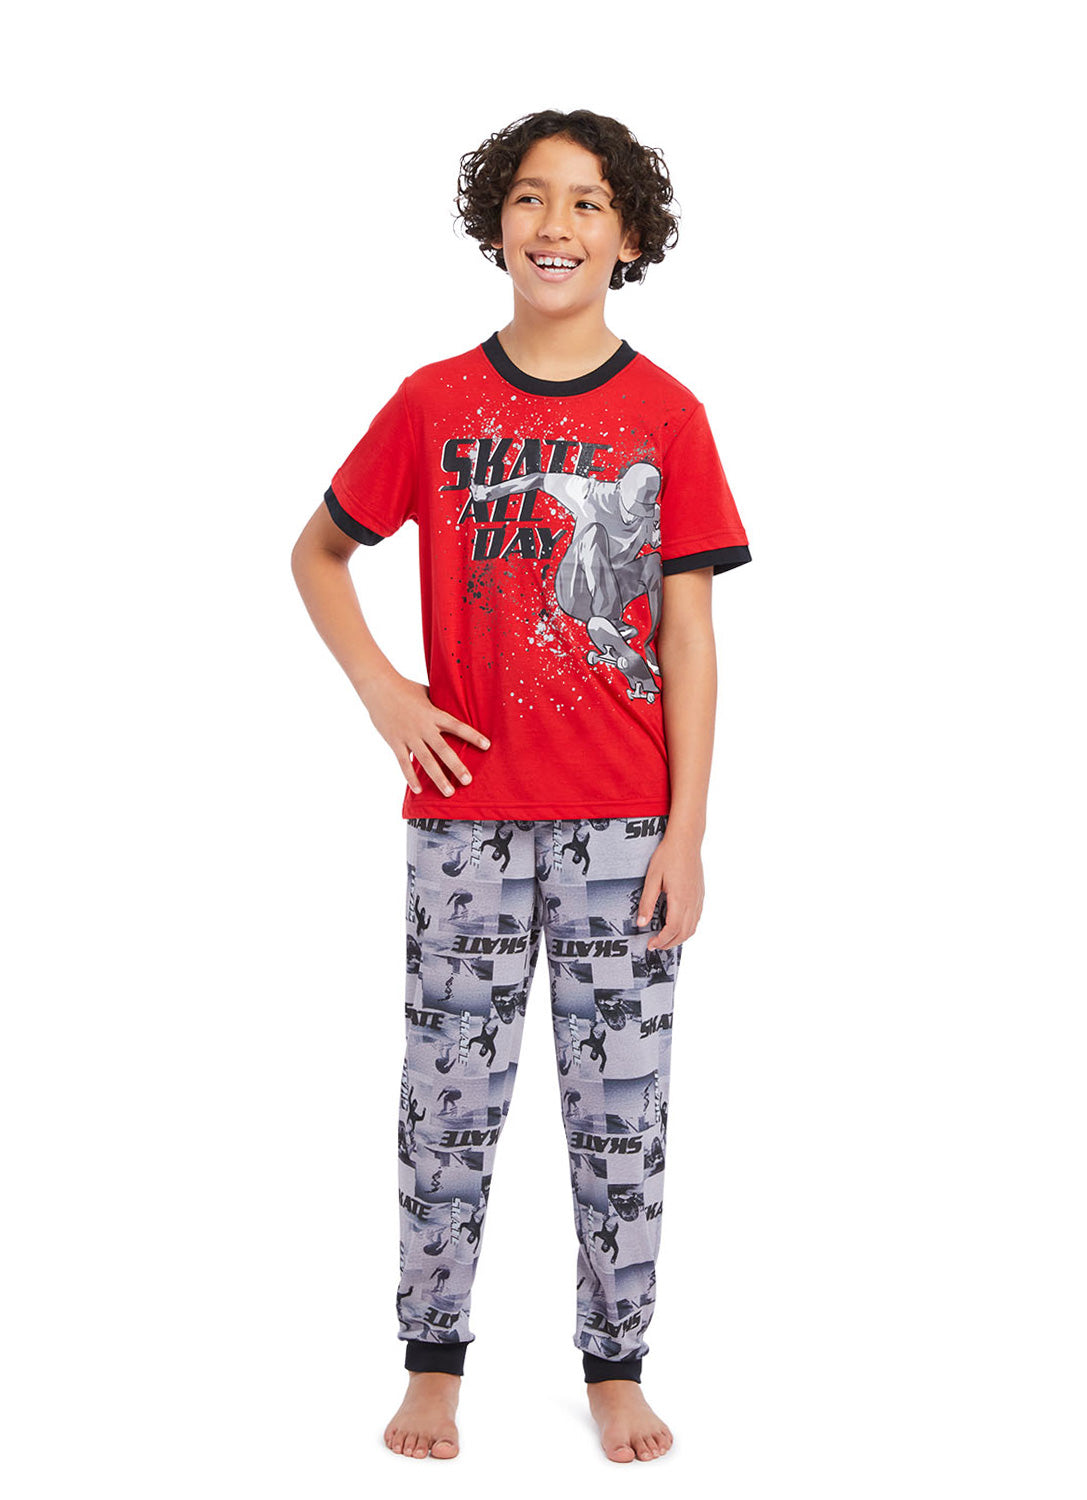 Boy wearing Pj set Skater, t-shirt (red) with print and pants (gray) with print